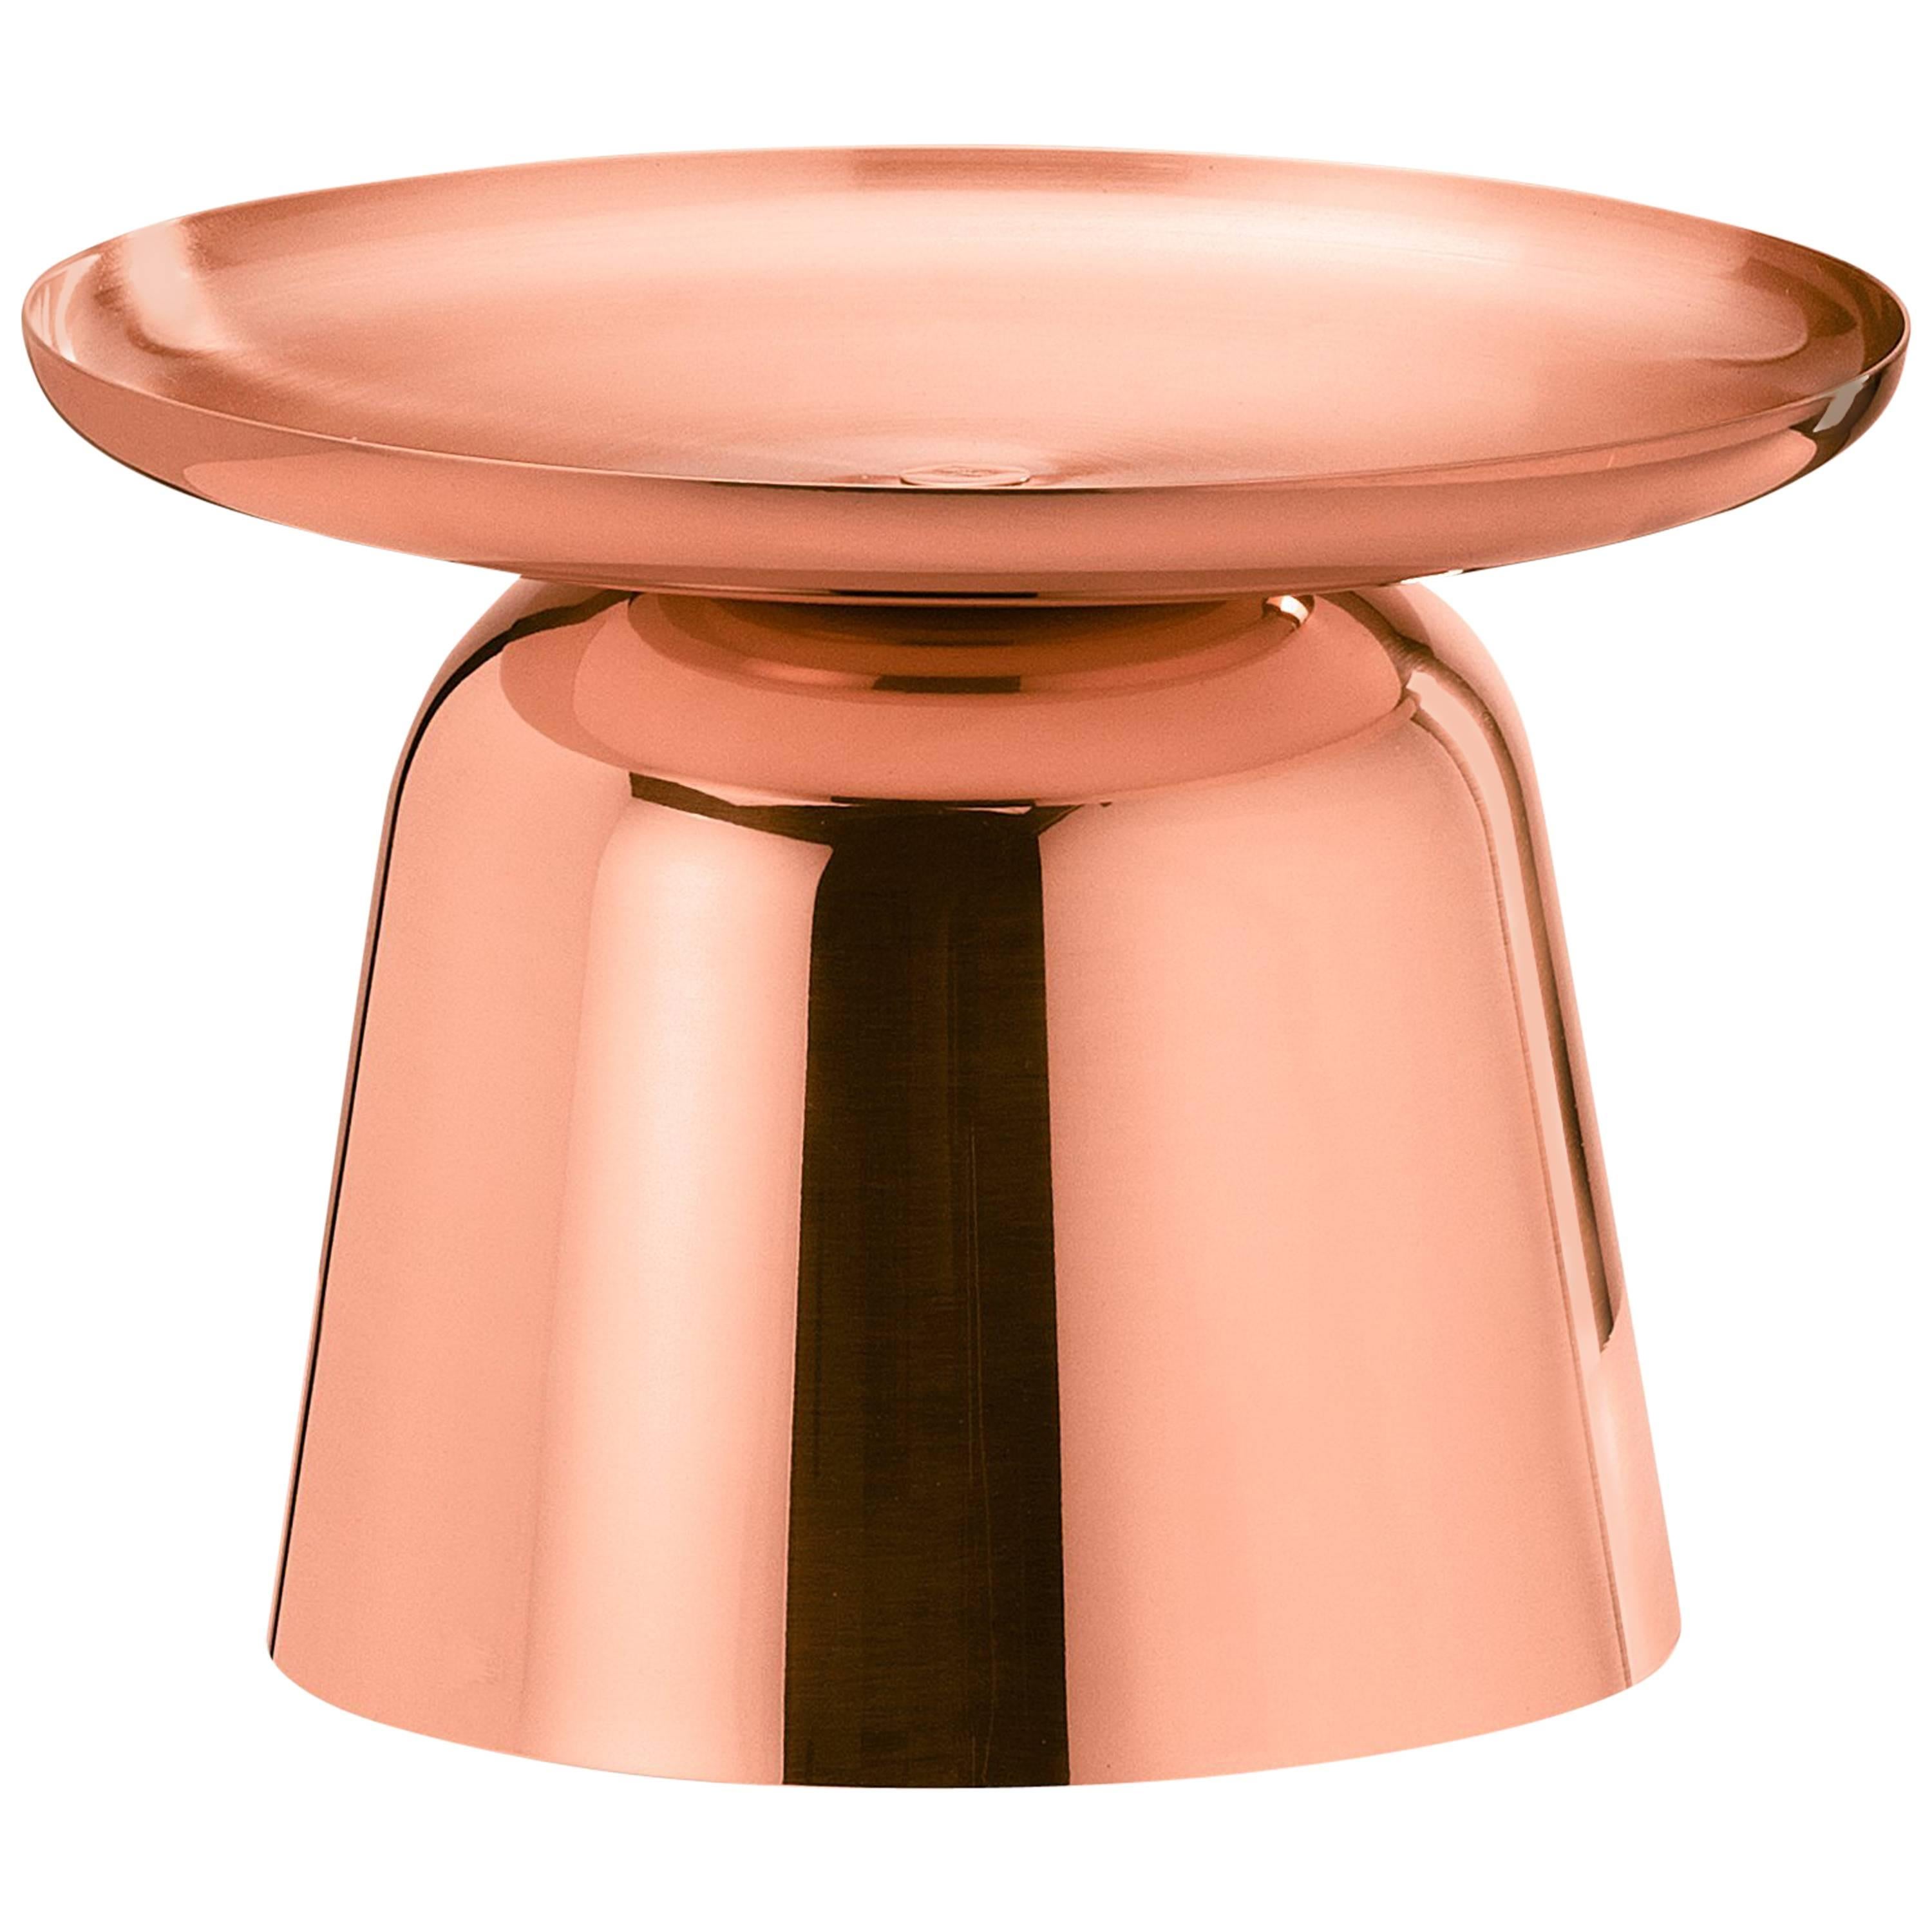 Ghidini 1961 Gil & Luc Small Vase in Rose Gold Finish For Sale